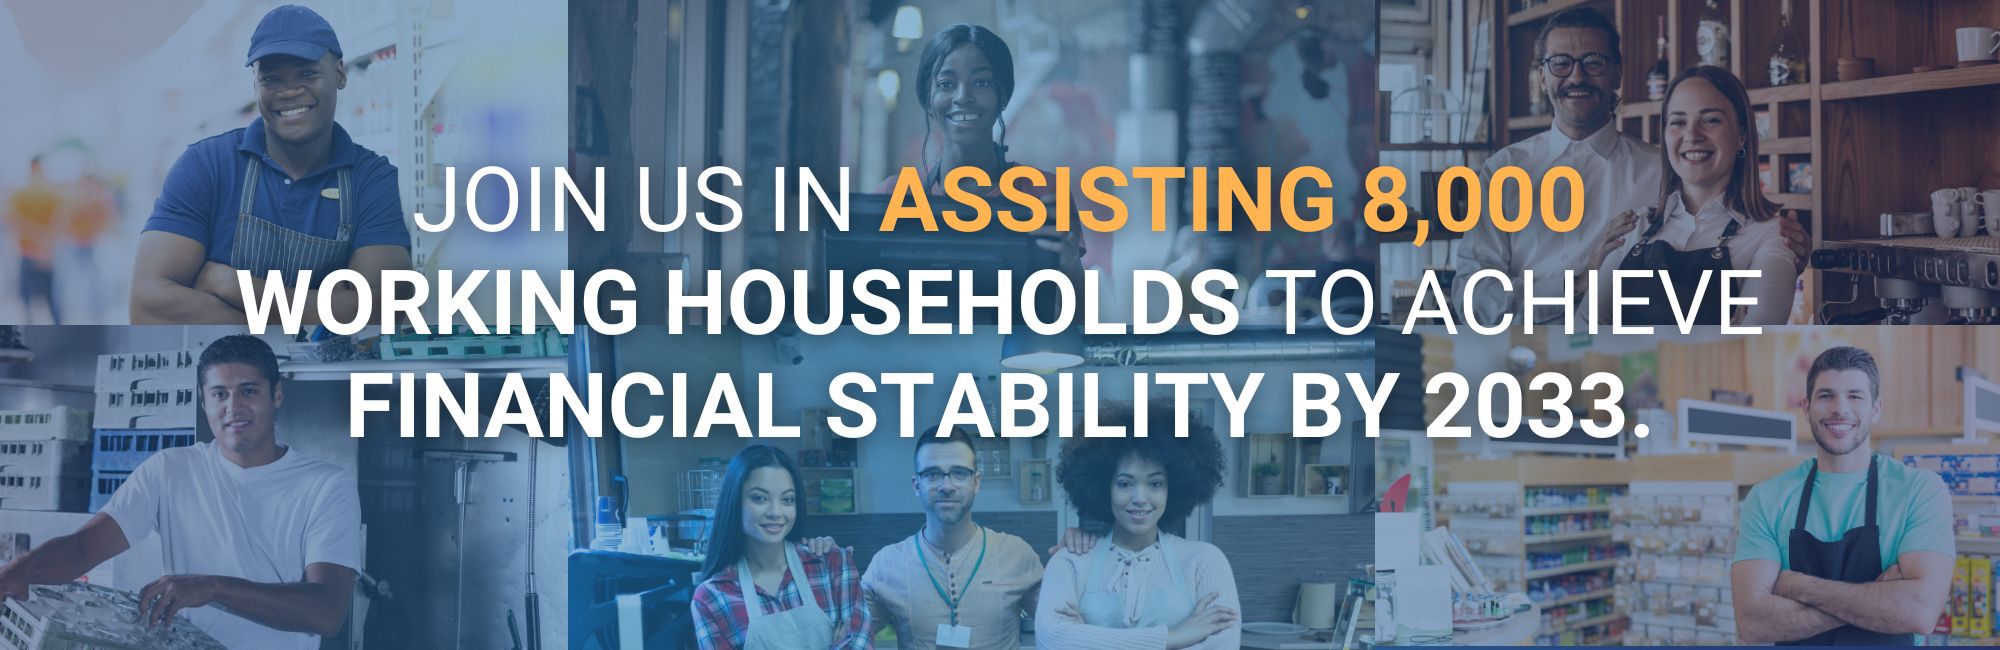 Join us in assisting 8,000 households achieve financial stability by 2033